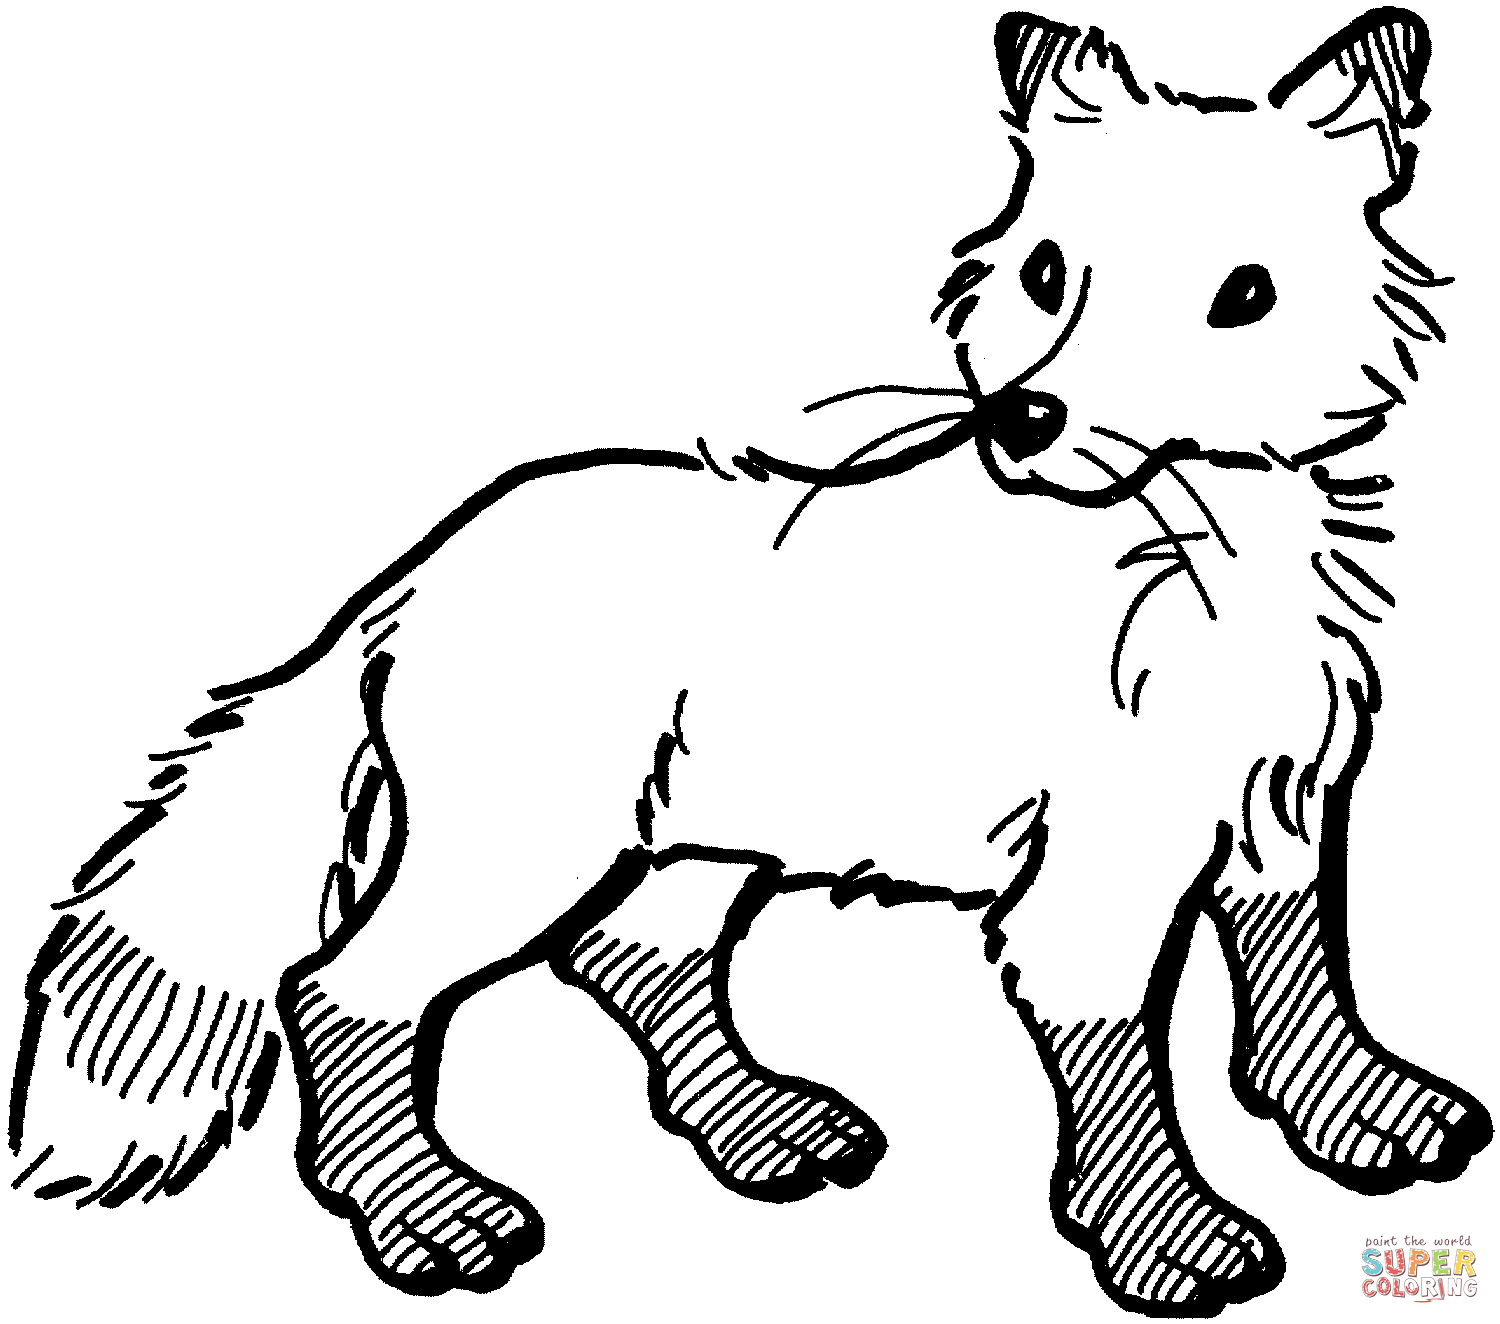 red fox coloring page fox coloring pages to download and print for free page fox coloring red 